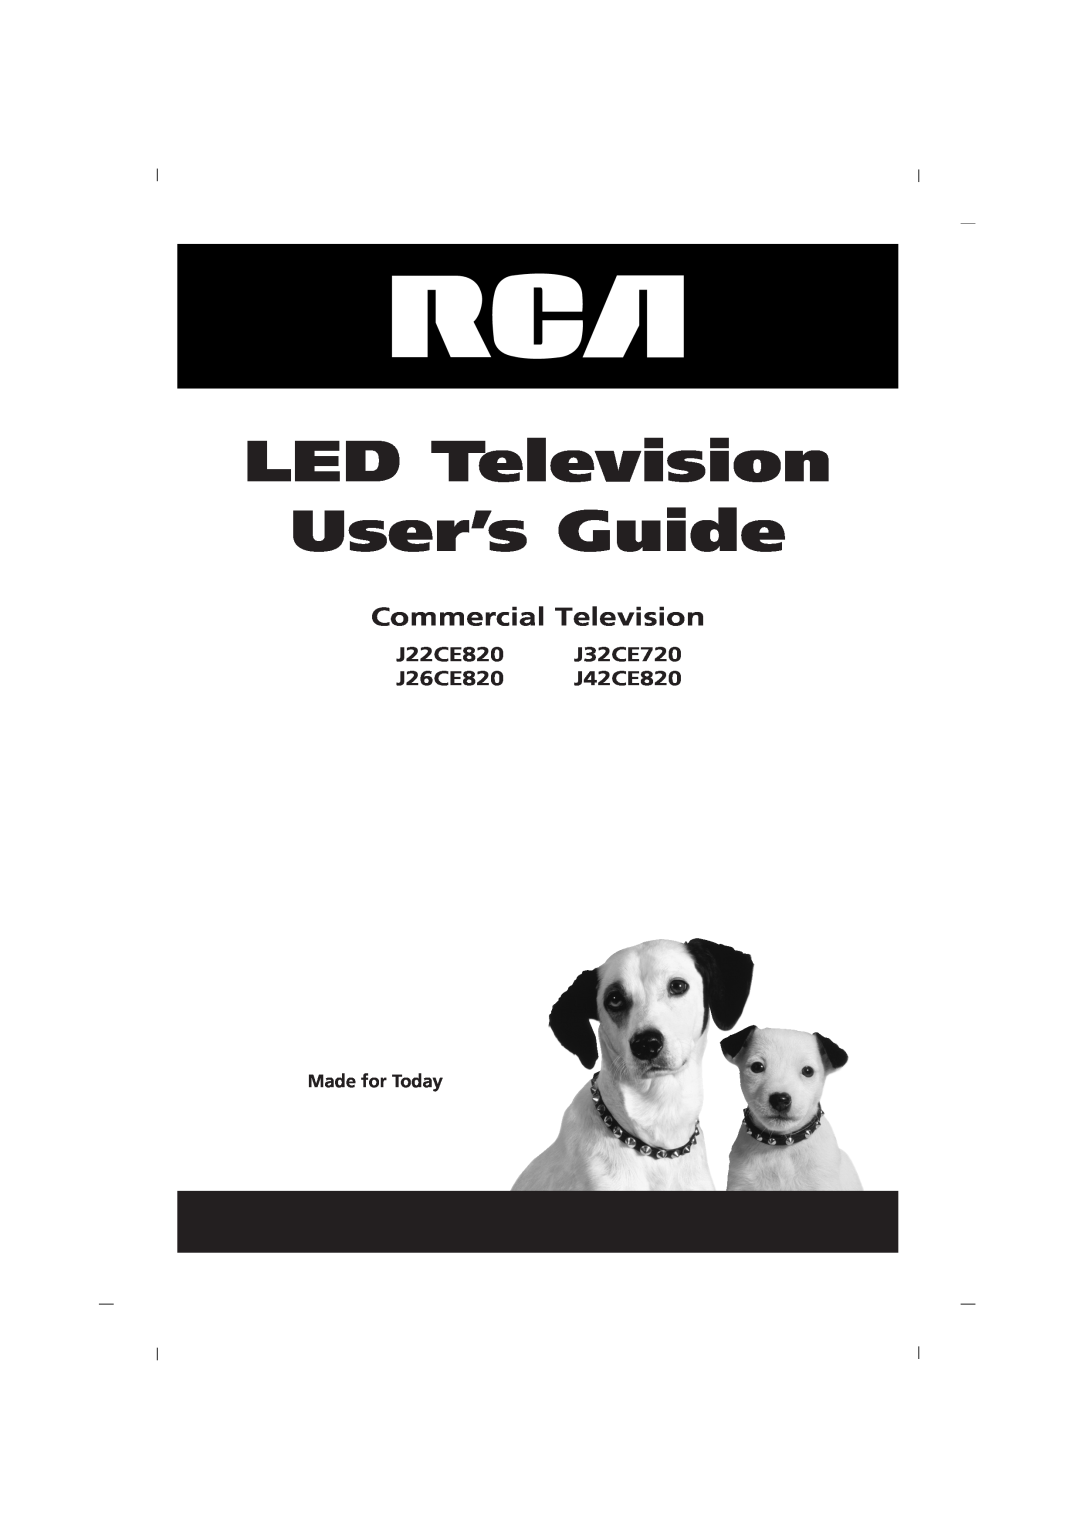 RCA manual LED Television User’s Guide, Commercial Television, J22CE820 J32CE720 J26CE820 J42CE820, Made for Today 